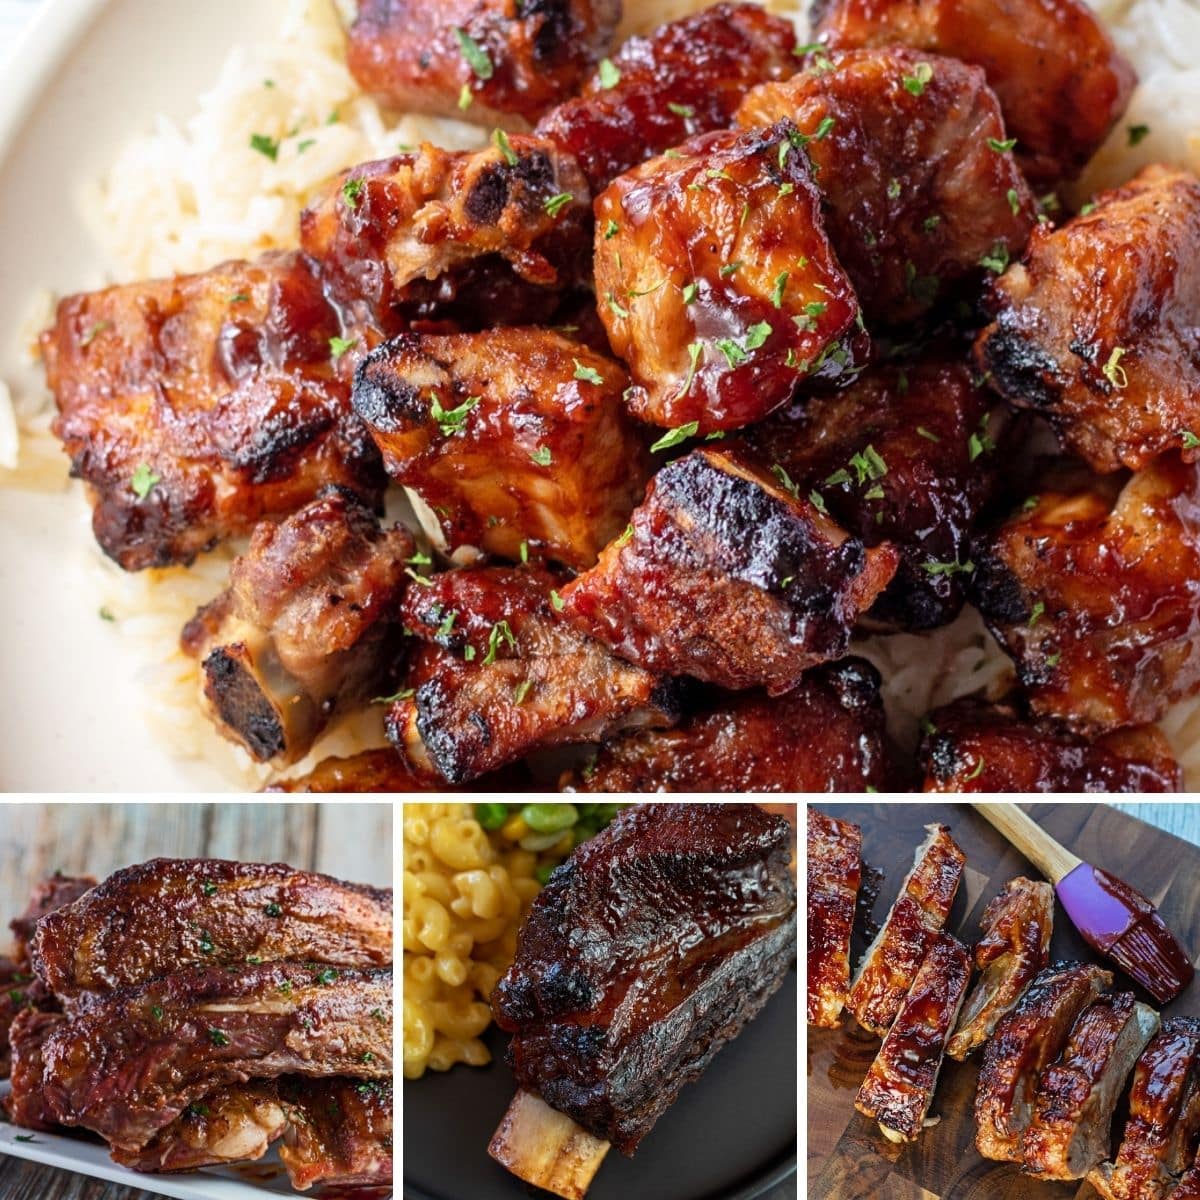 The best rib recipes to make any time of year with 4 featured recipes in a collage image.